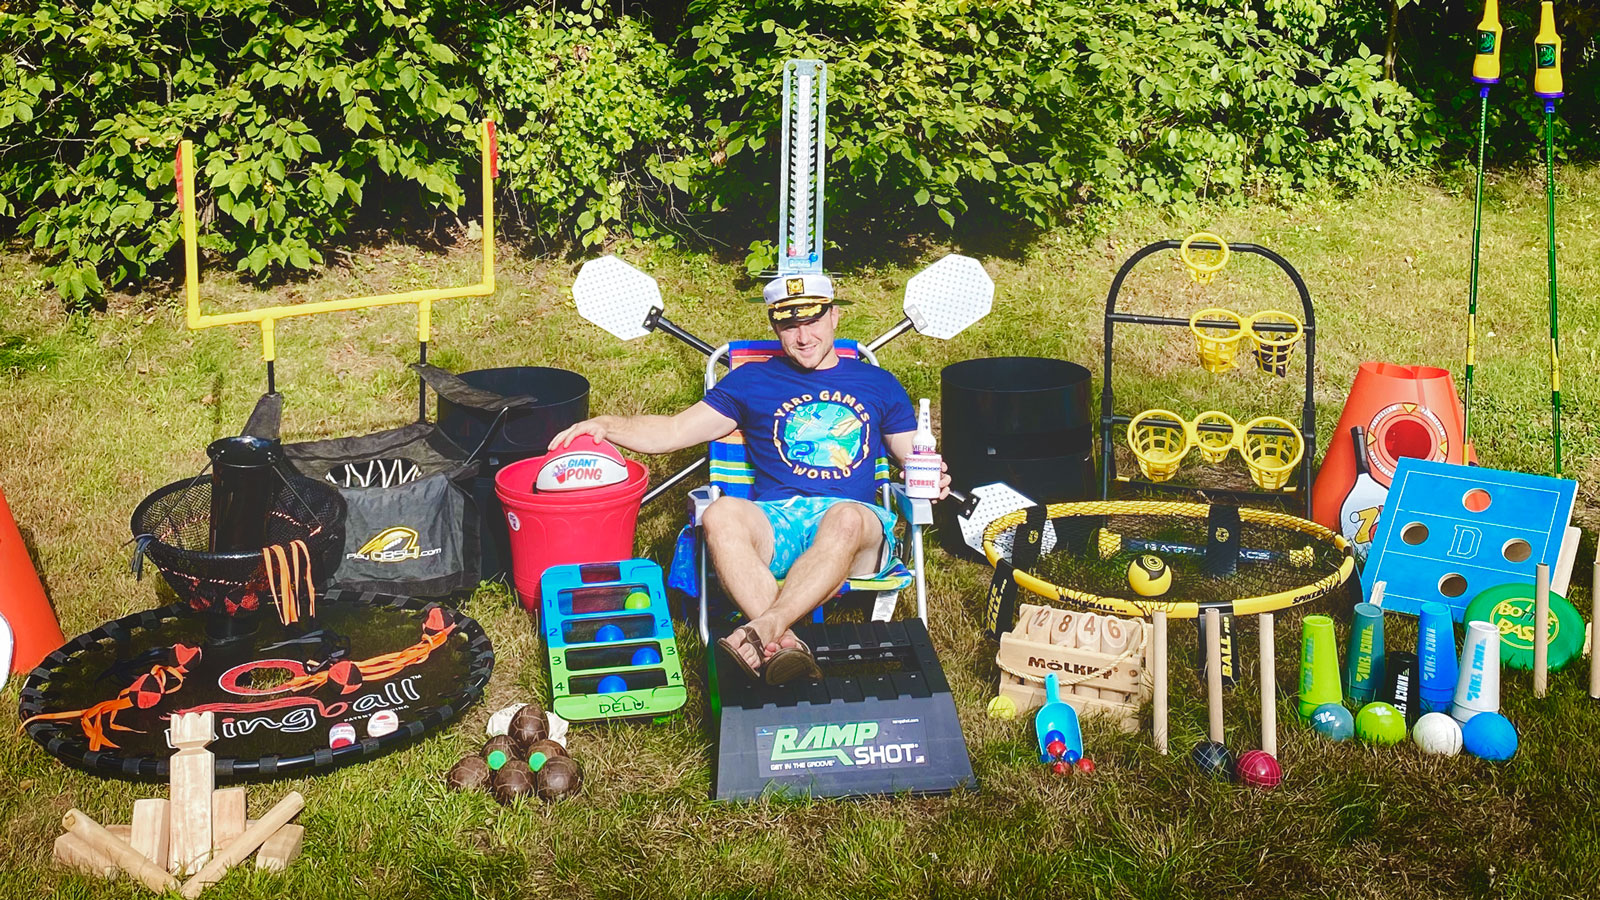 Matt Grear sits in a lawn chair on the grass surrounded by lawn games that he has acquired